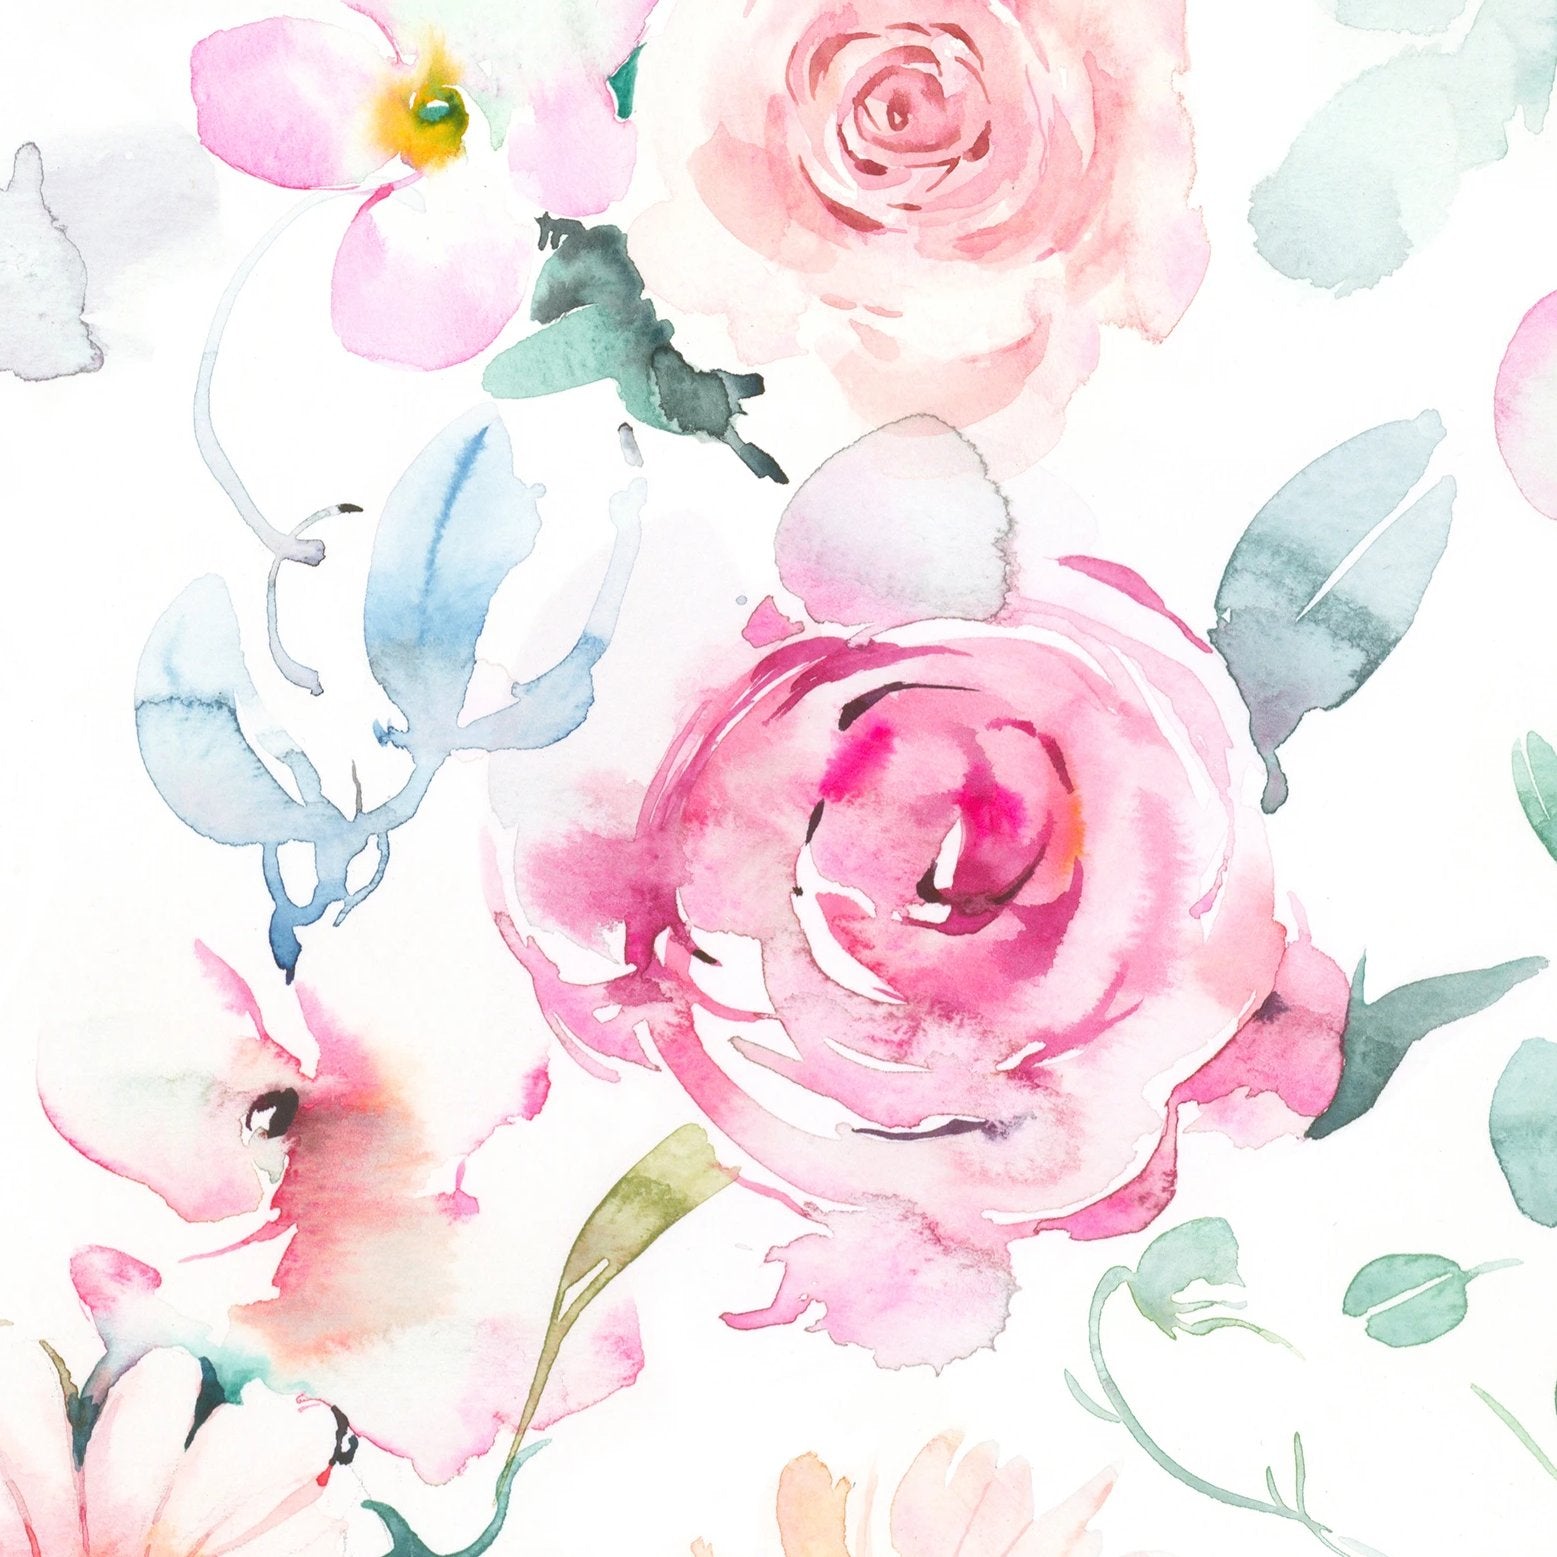 Close-up view of Pink Floral Wallpaper showcasing the delicate watercolor roses and greenery in pink, green, and white tones, highlighting the intricate details of the floral design.